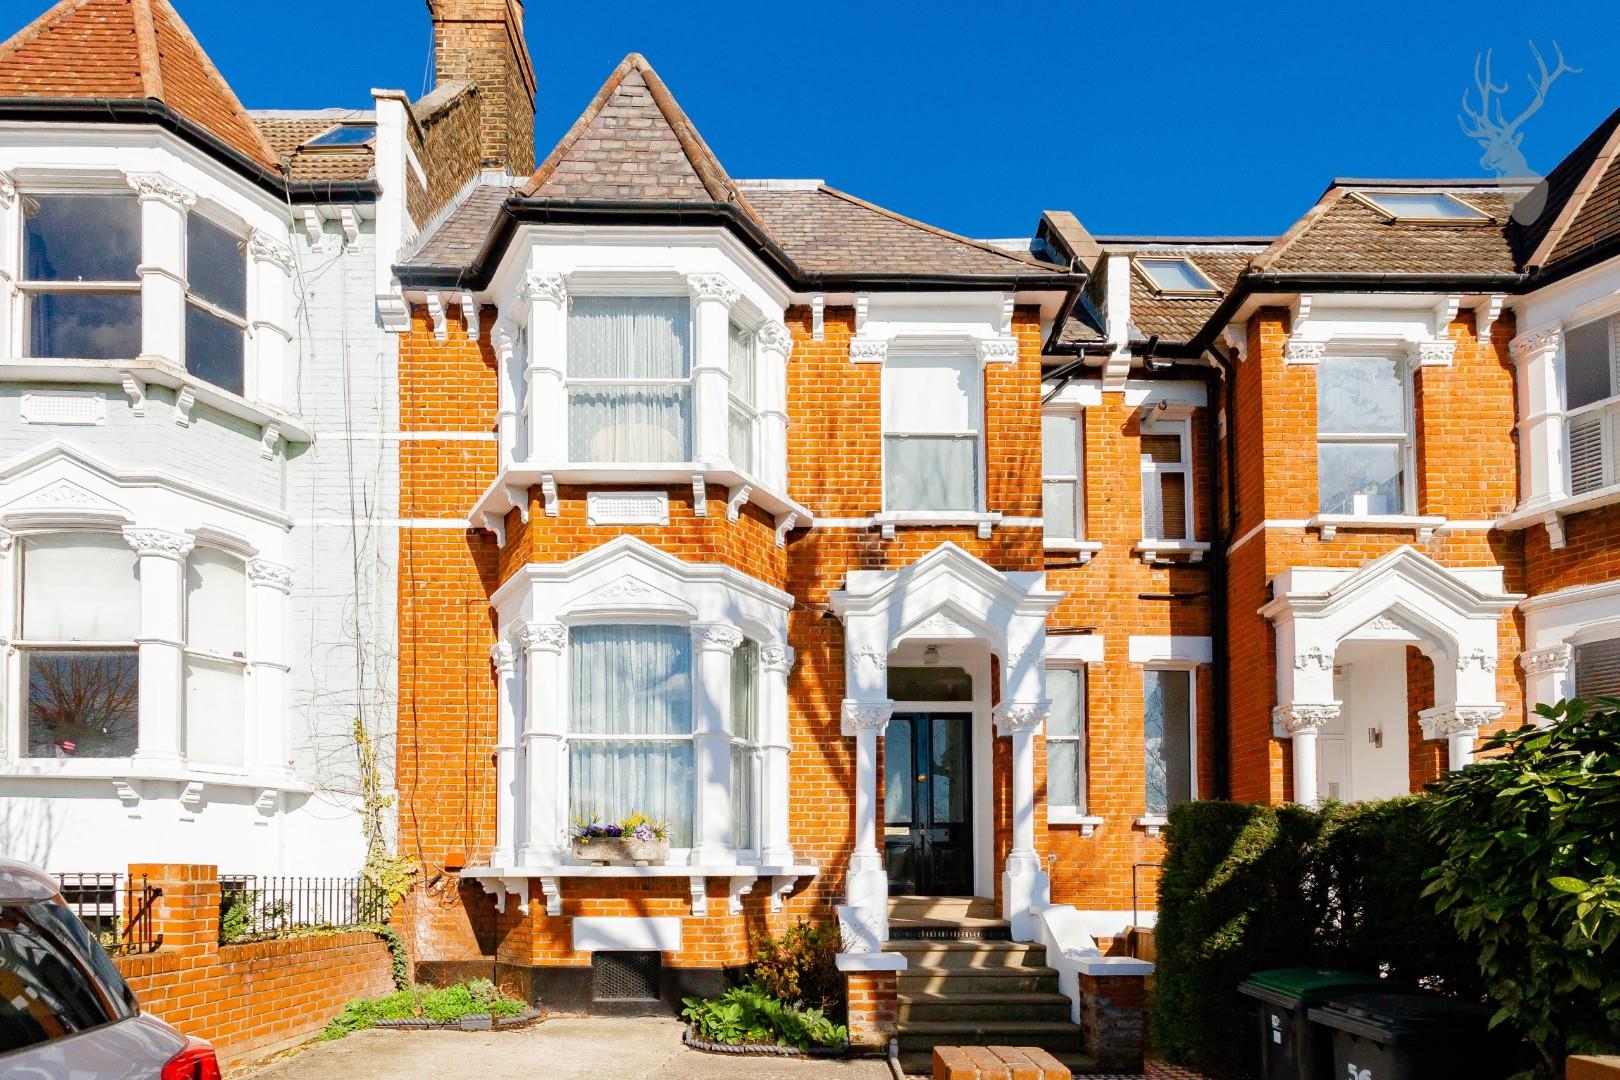 Similar Property: House in Crouch End